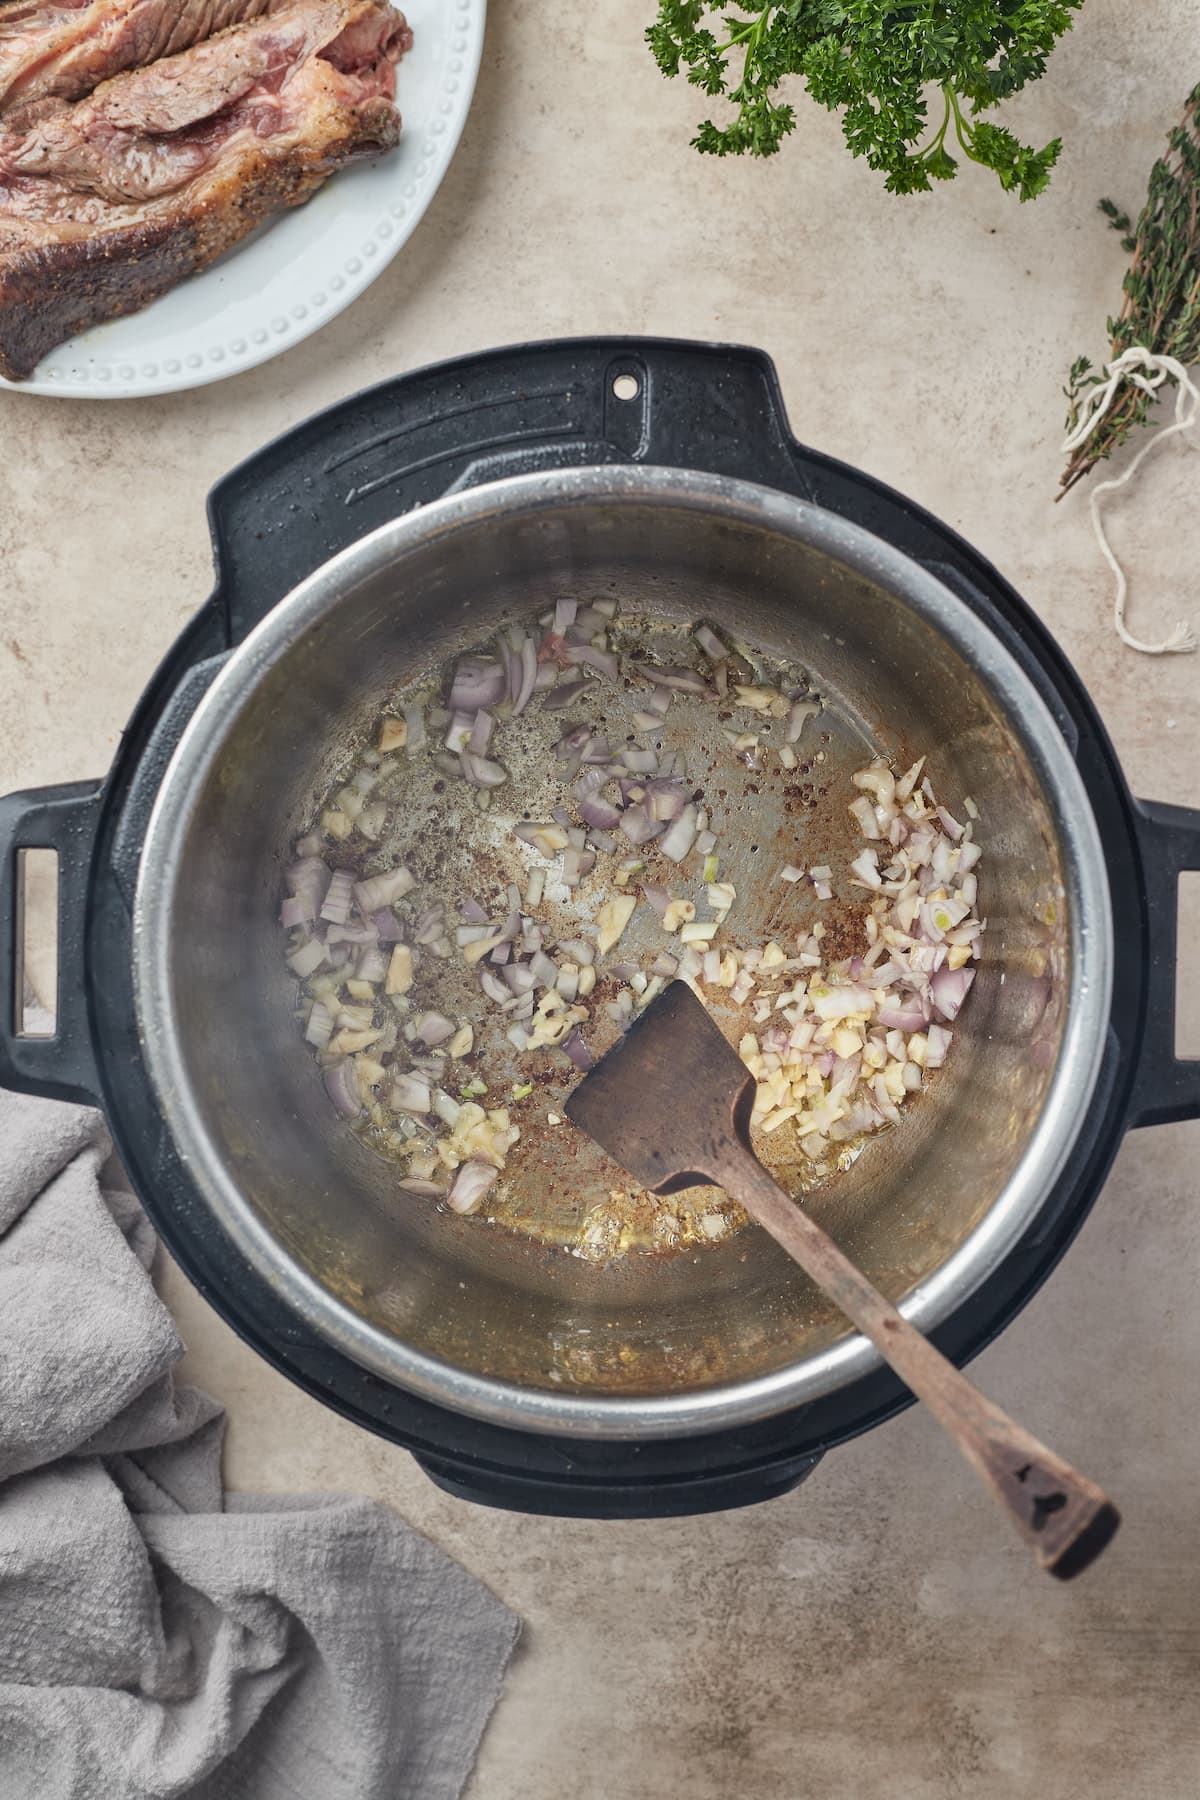 Onions and garlic are sauted in the bowl of an Instant Pot.